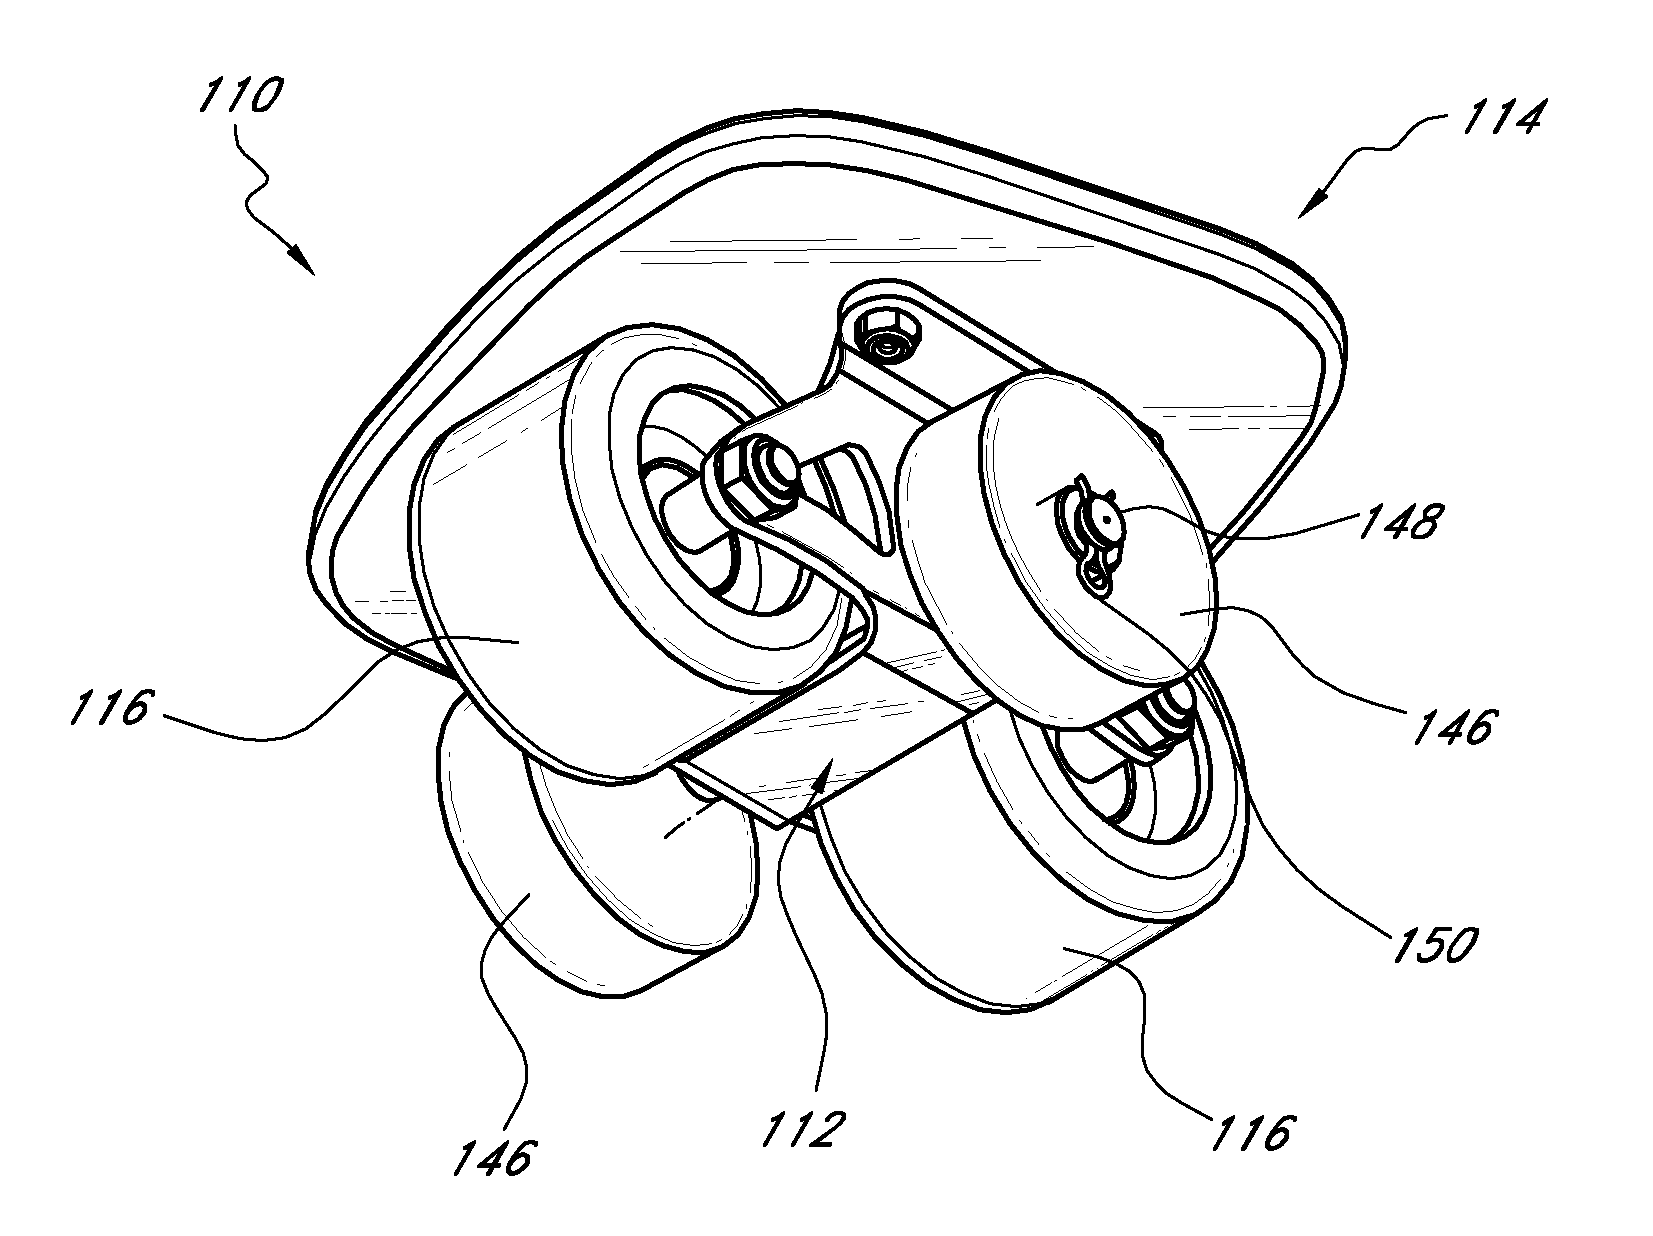 Personal transportation device for supporting a user's foot